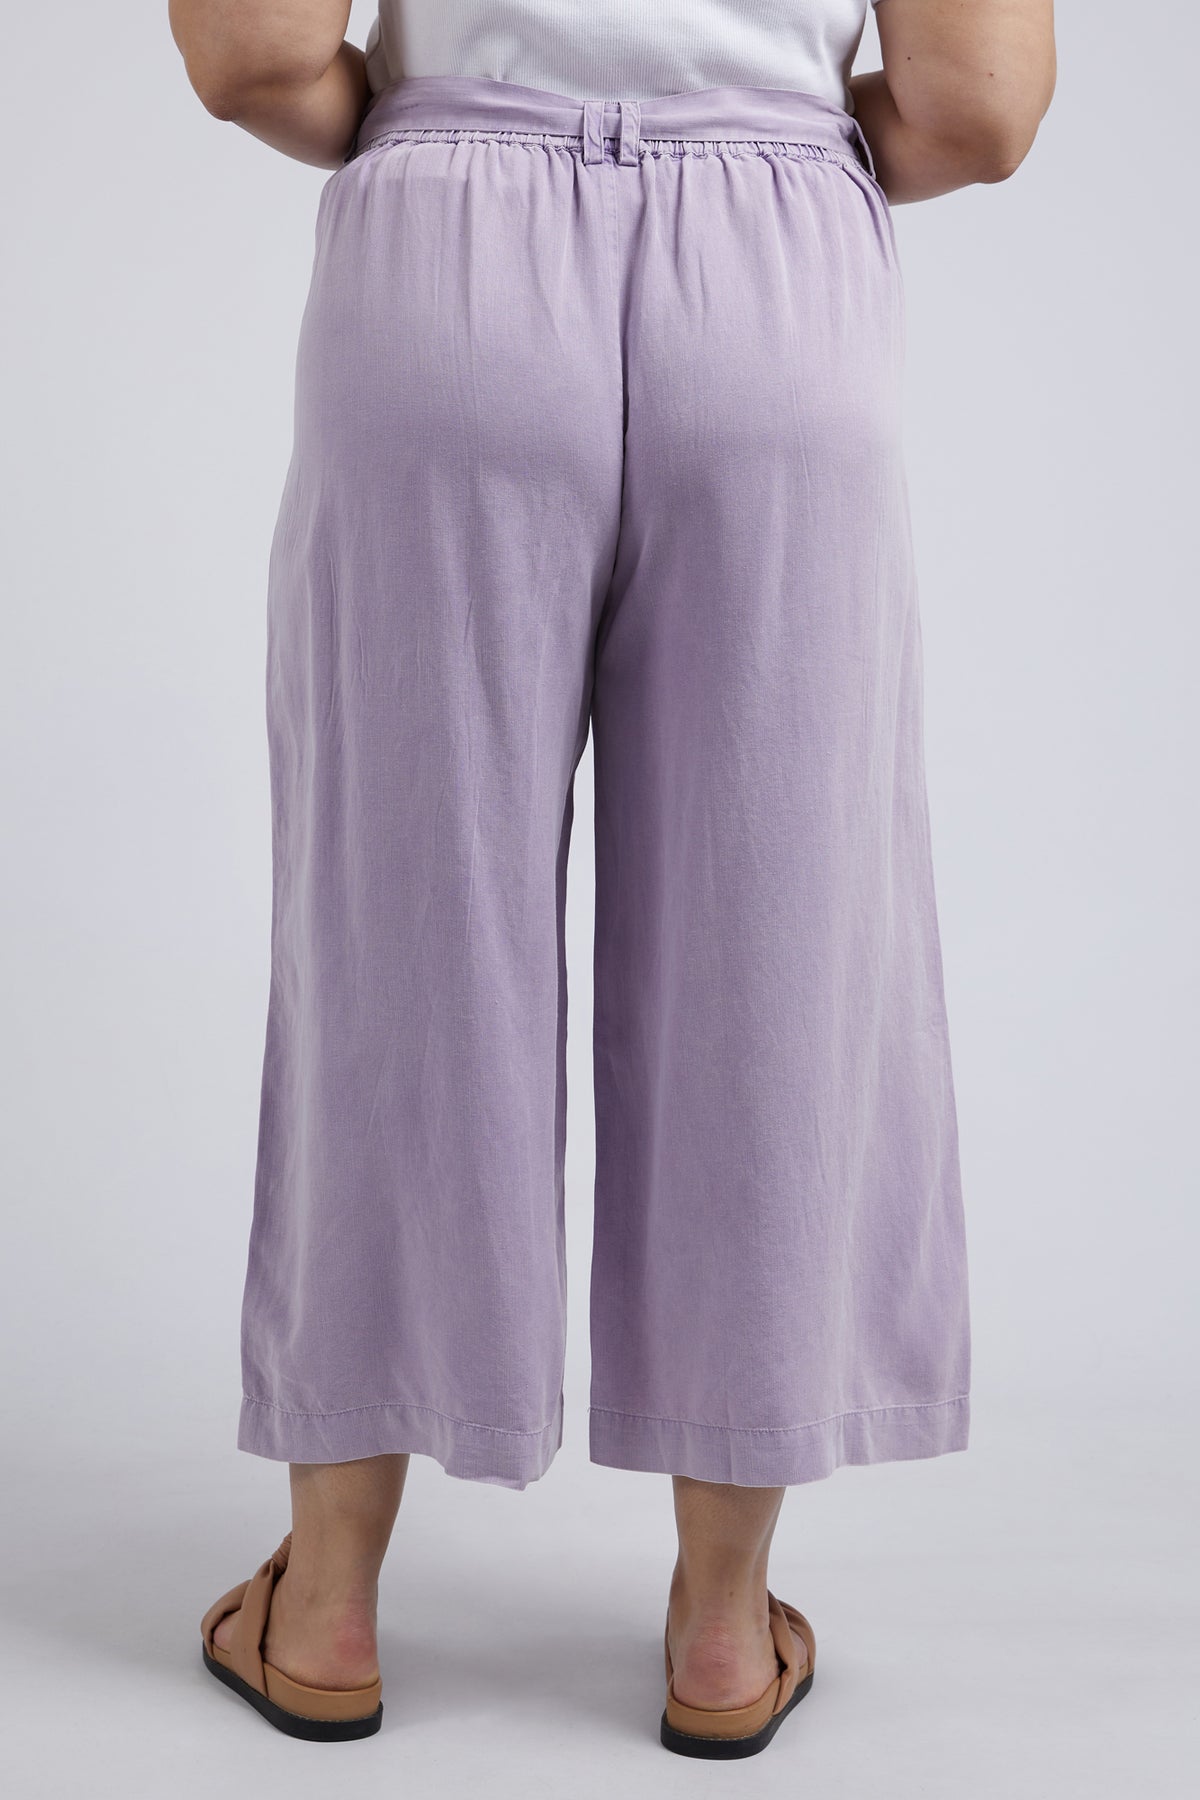 Bliss Washed Pant Periwinkle